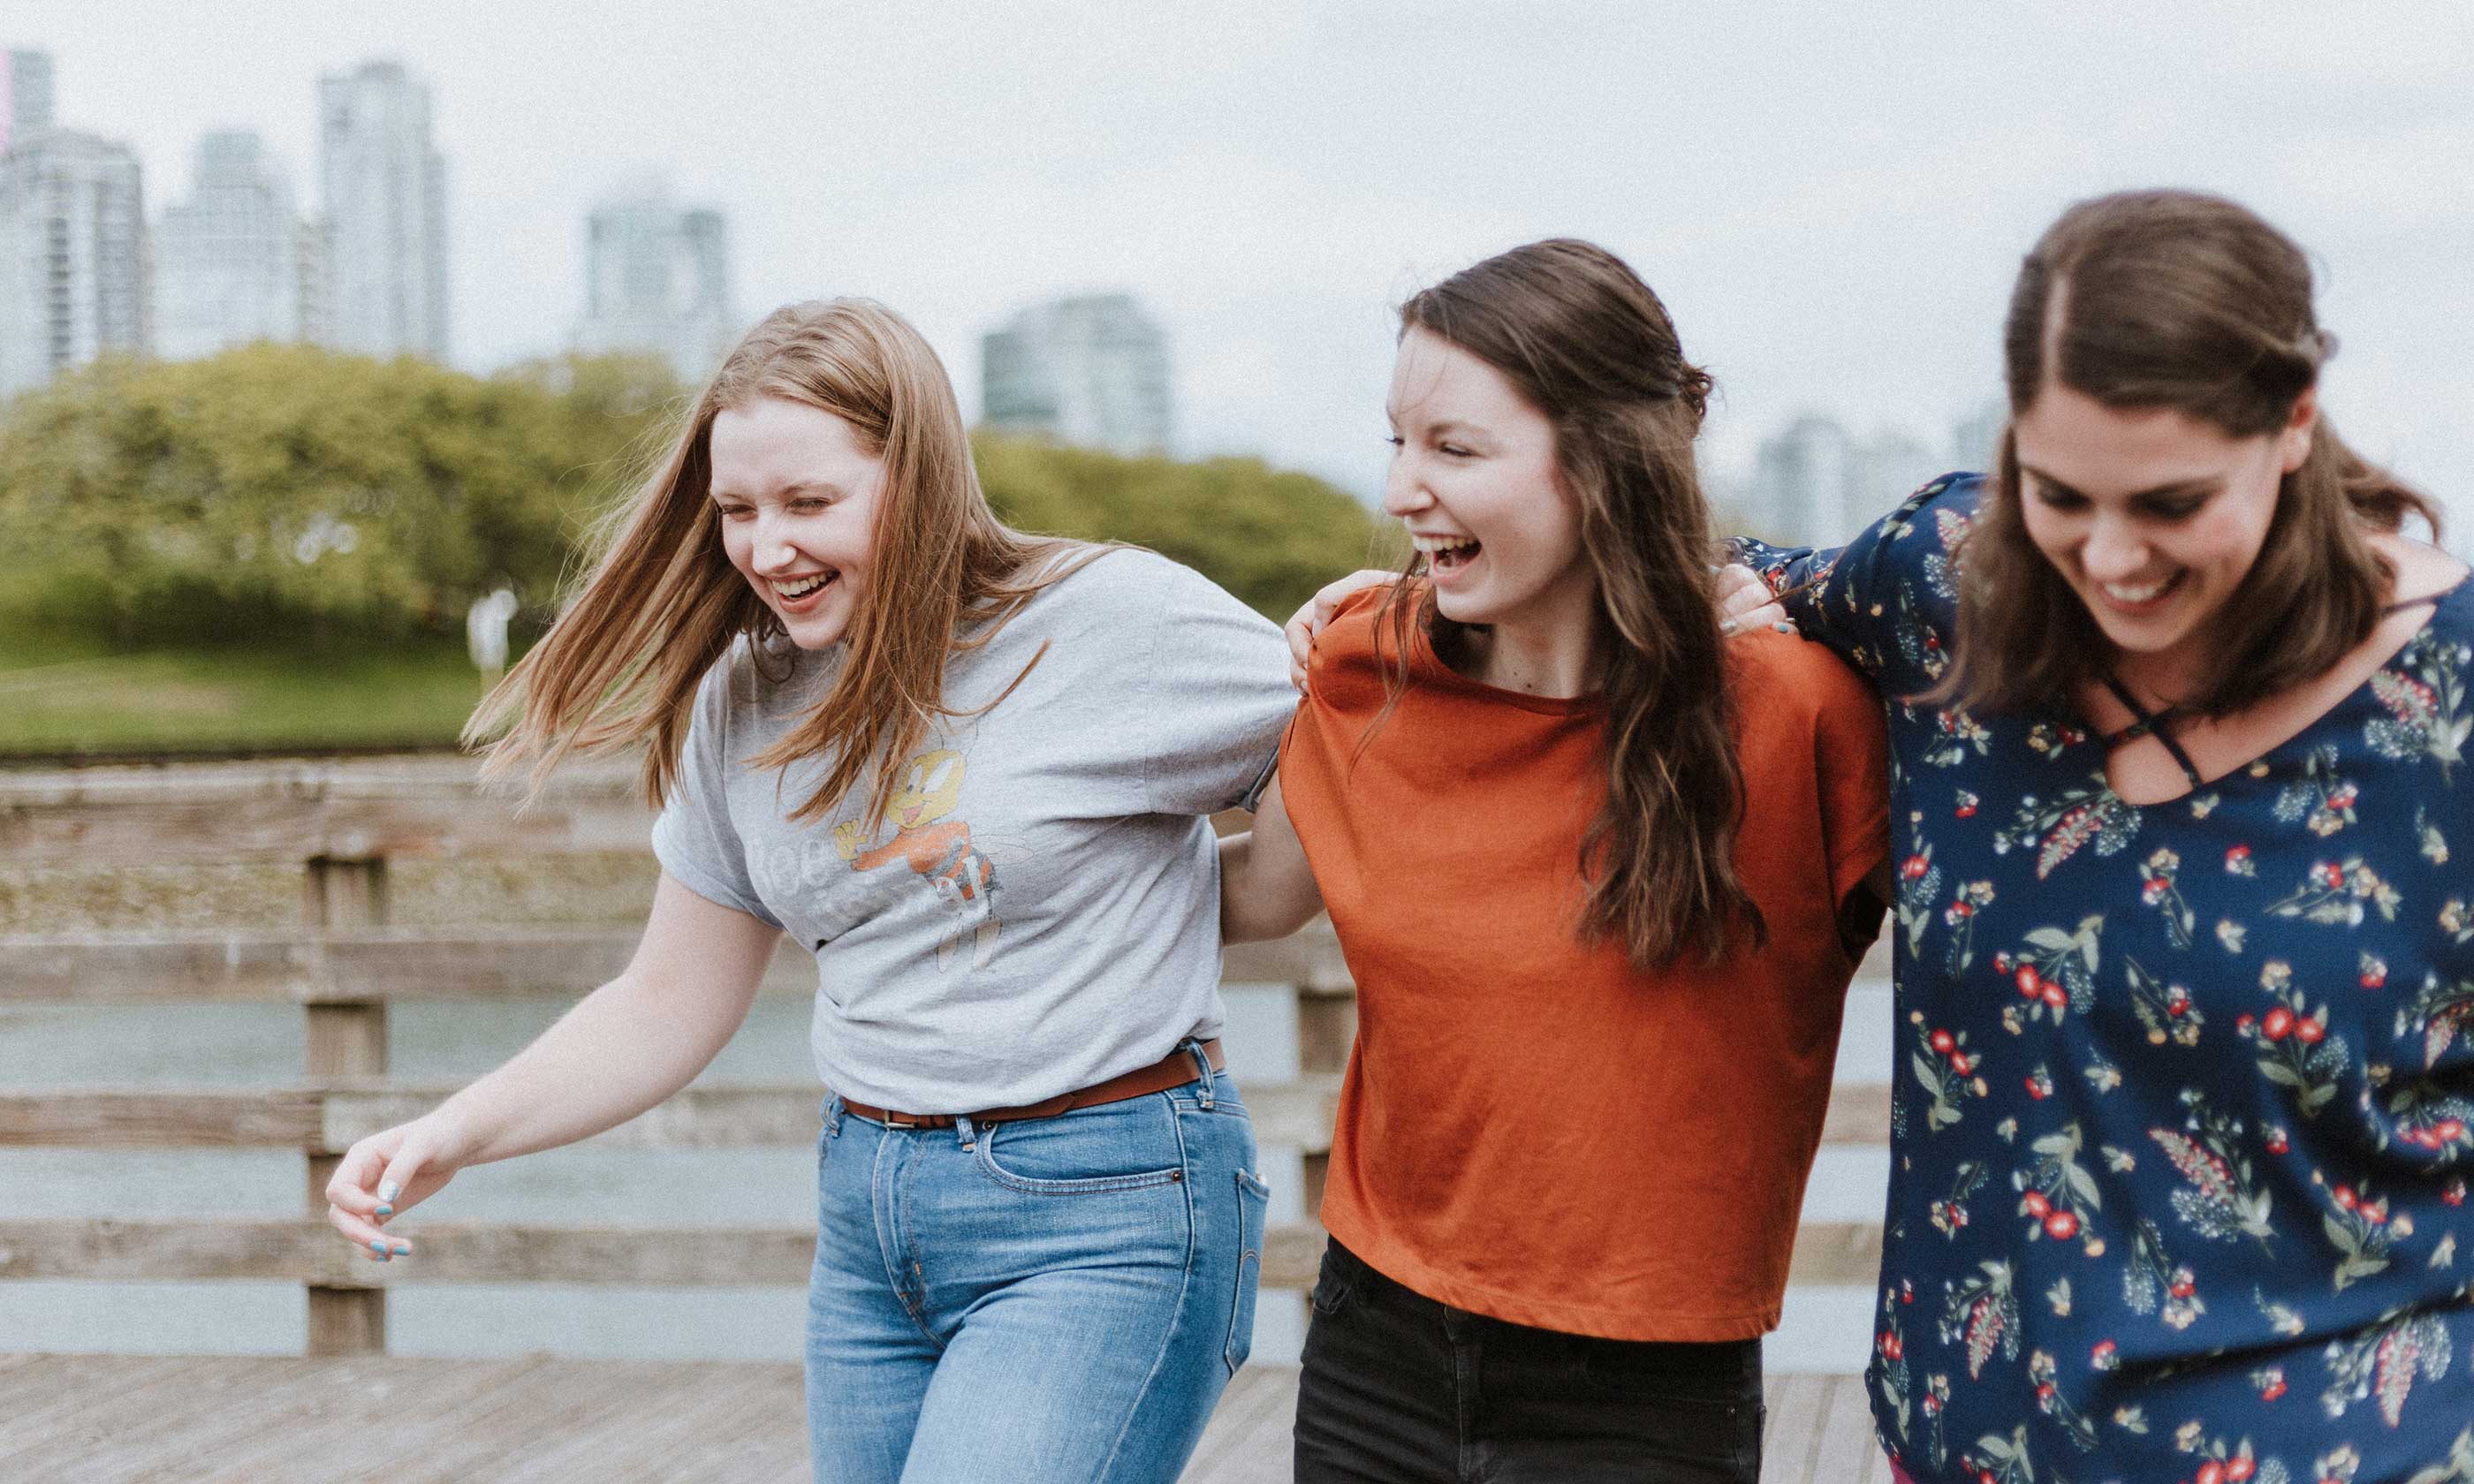 Young women laughing arm-in-arm